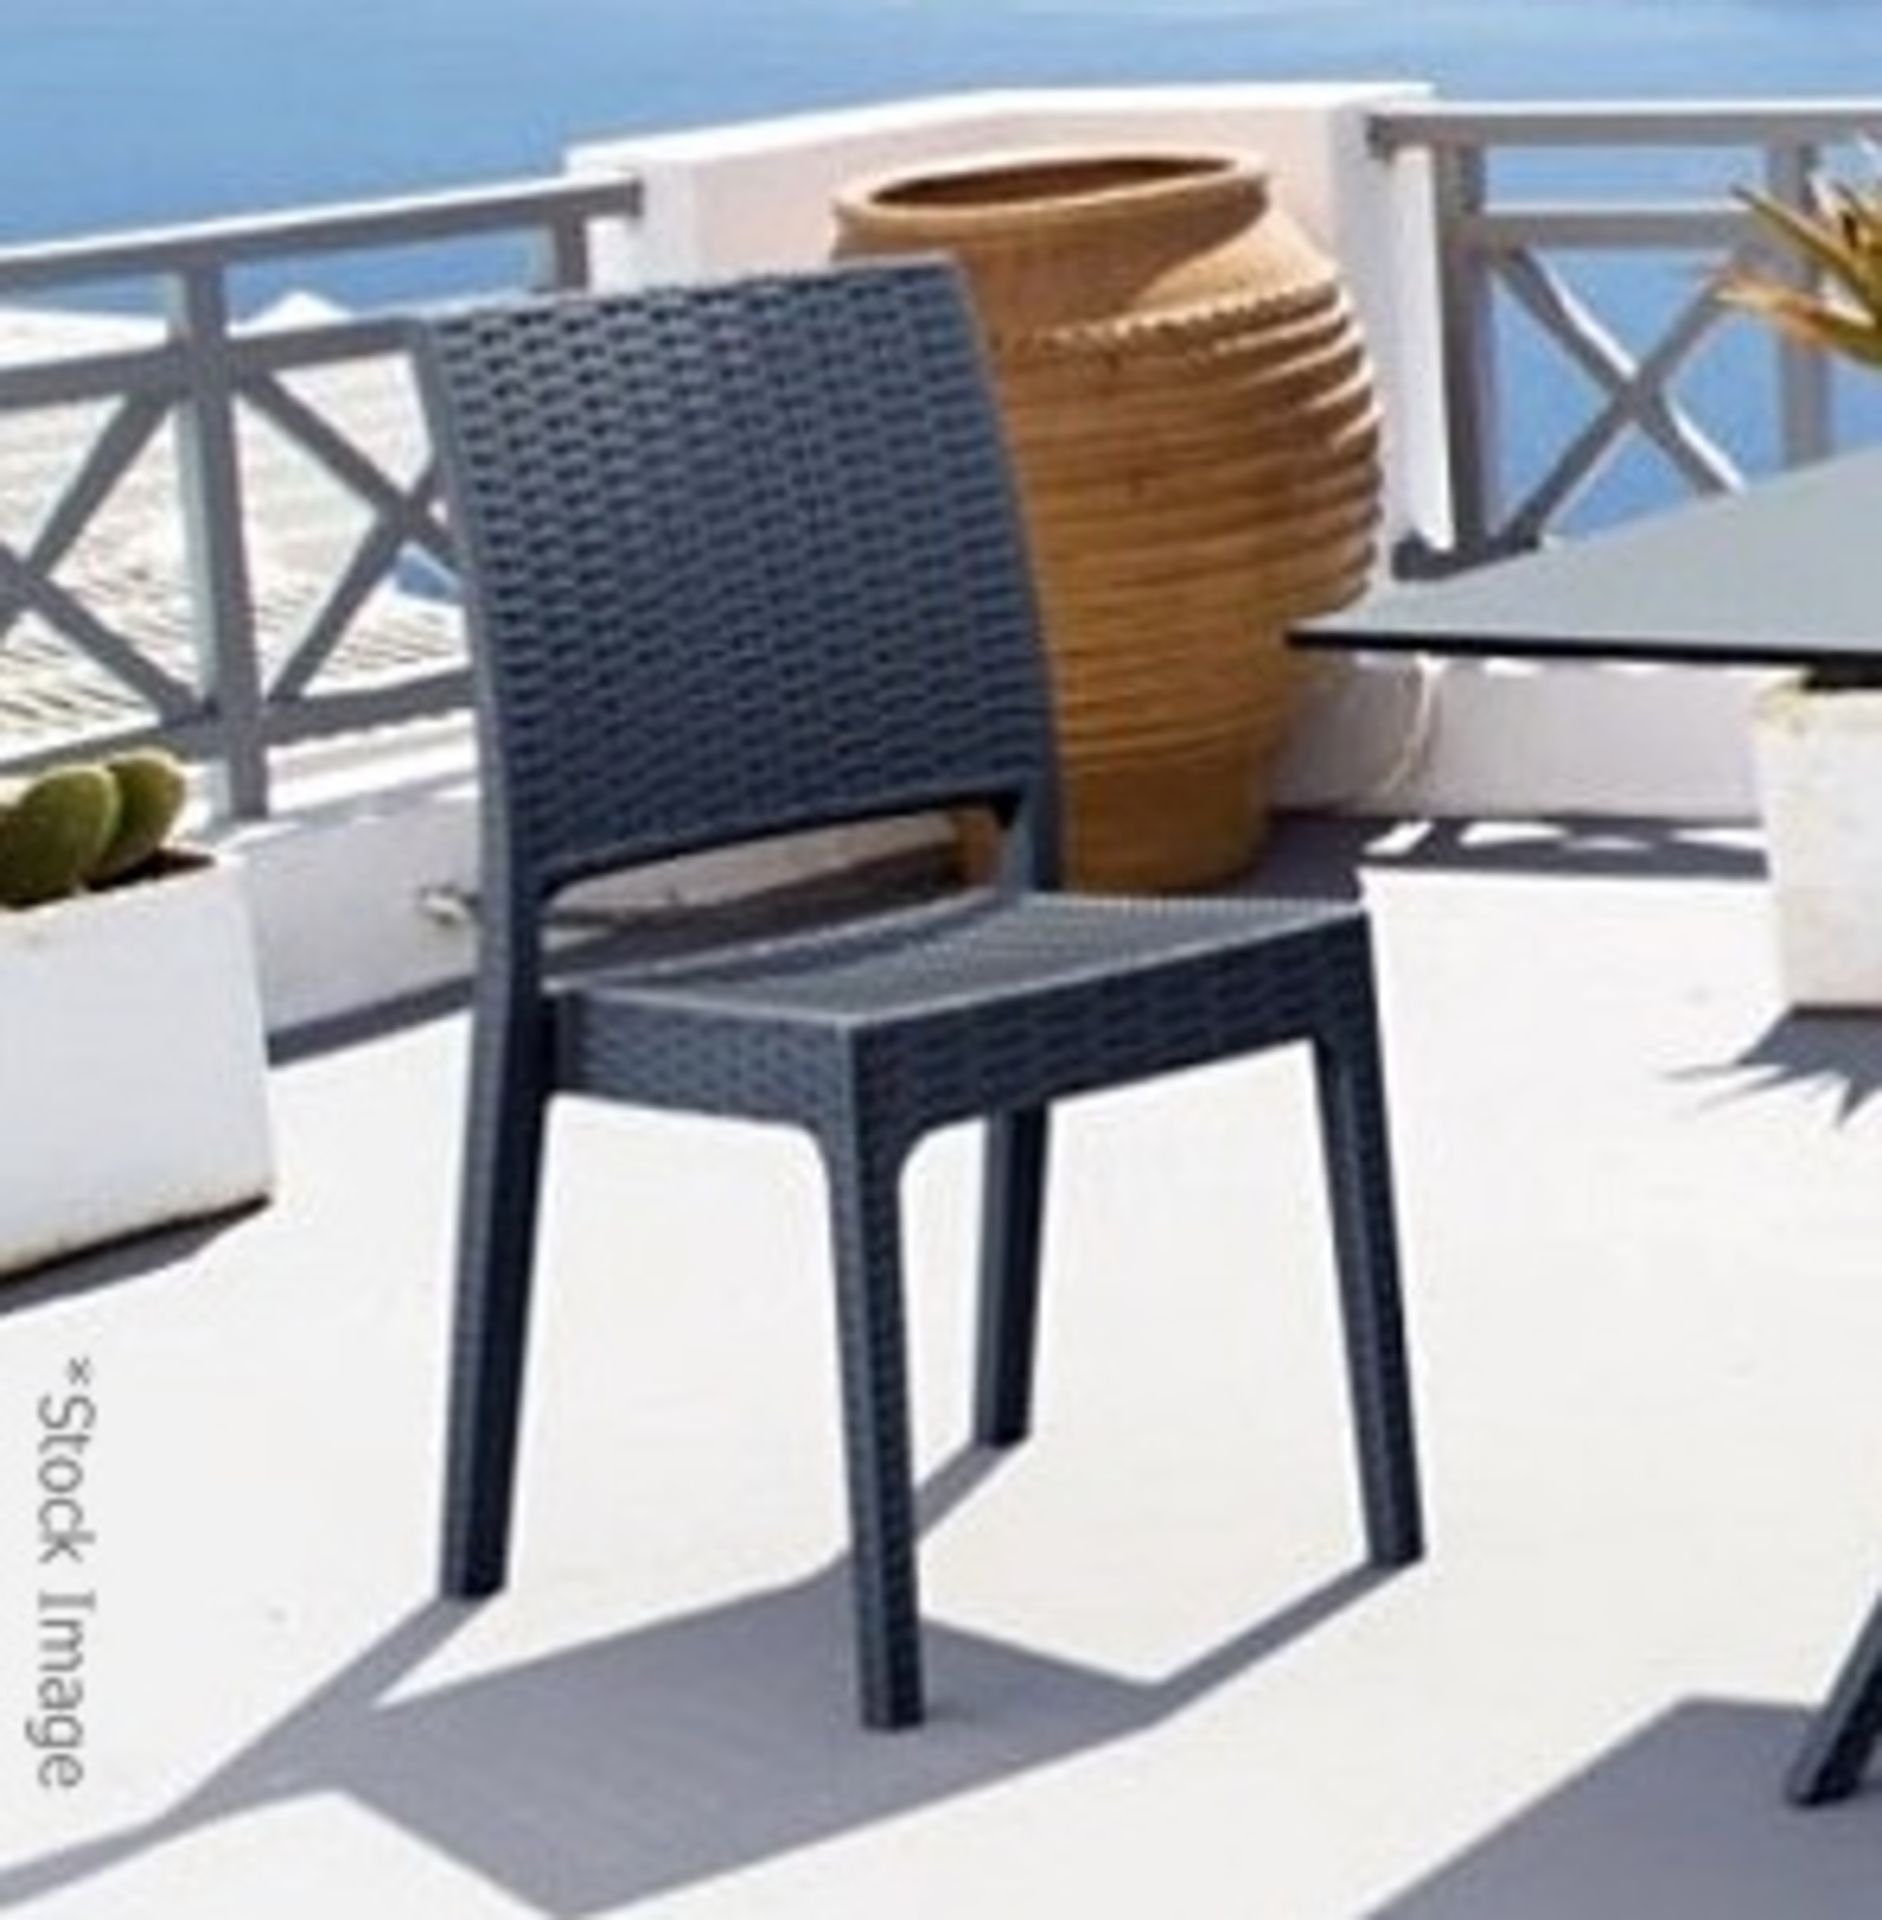 4 x SIESTA EXCLUSIVE 'Florida' Commercial Stackable Rattan-style Chairs In Dark Grey - CL987 - Total